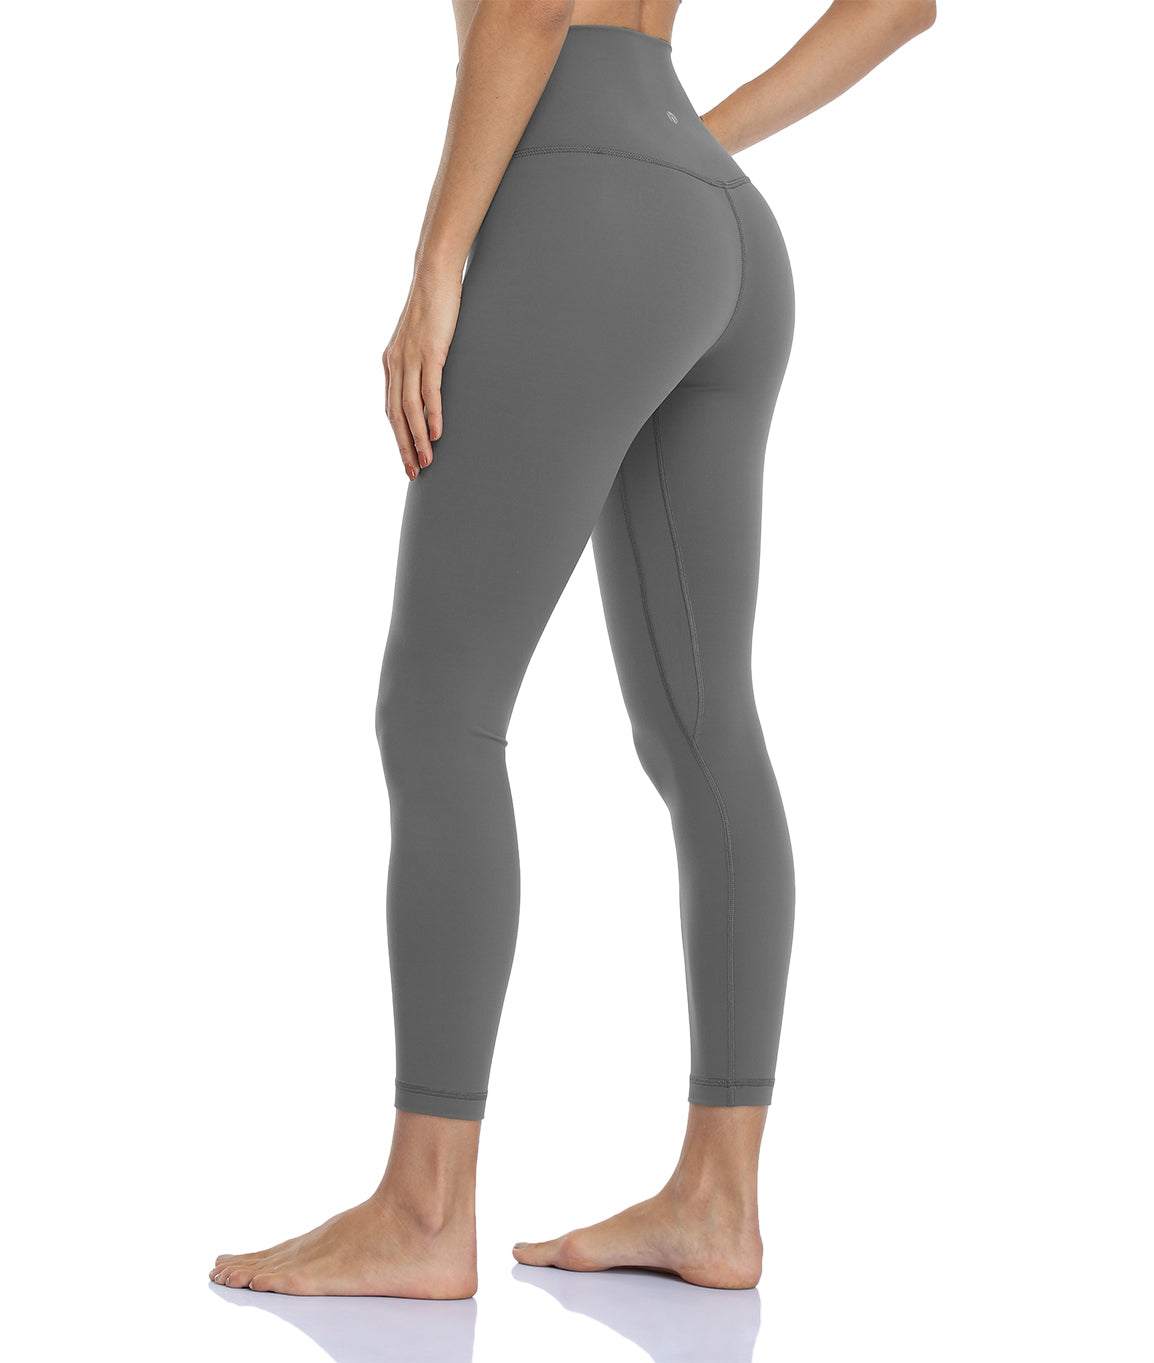 HeyNuts Essential High Waisted Yoga Leggings For Tall Women, Buttery Soft  Full Length Workout Pants 28 Java Coffee XL